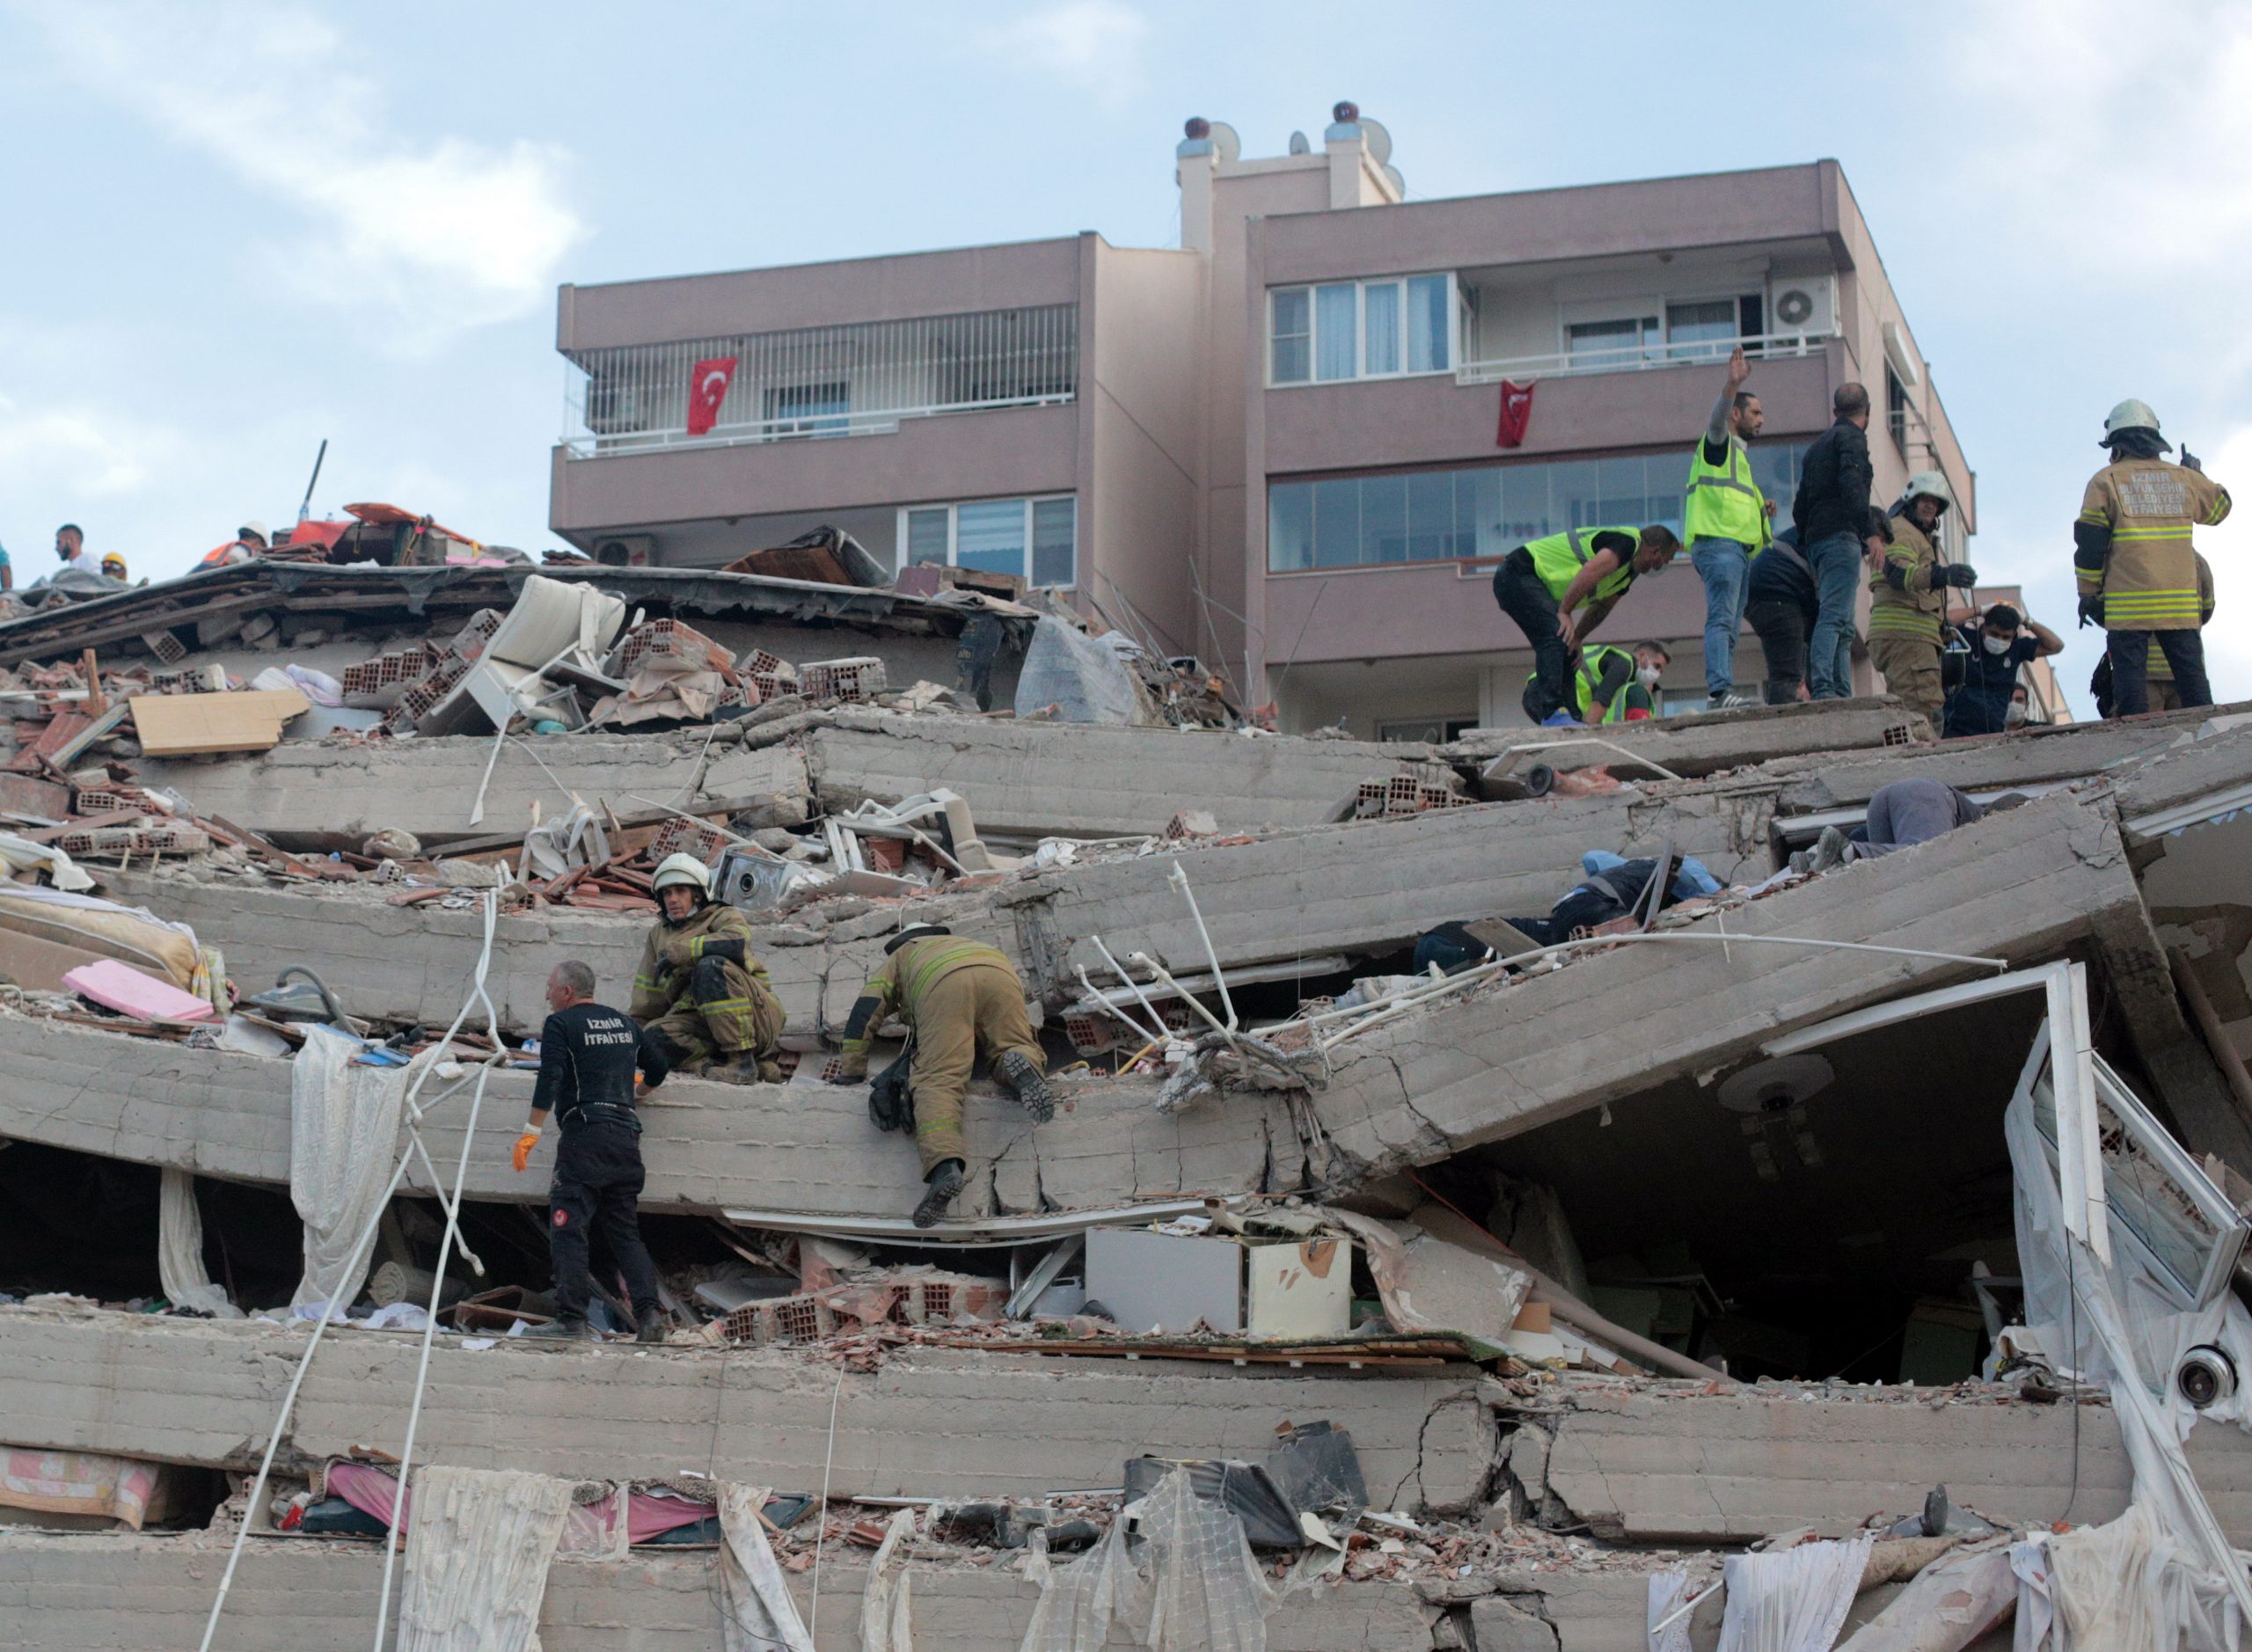 epa08786511 Rescue workers and people search for survivors at a collapsed building after a 7.0 magnitude earthquake in the Aegean Sea in Izmir, Turkey, 30 October 2020. According to Turkish media reports, at least six people died while hundreds were injured and dozens of buildings were destroyed in the earthquake.  EPA/STRINGER